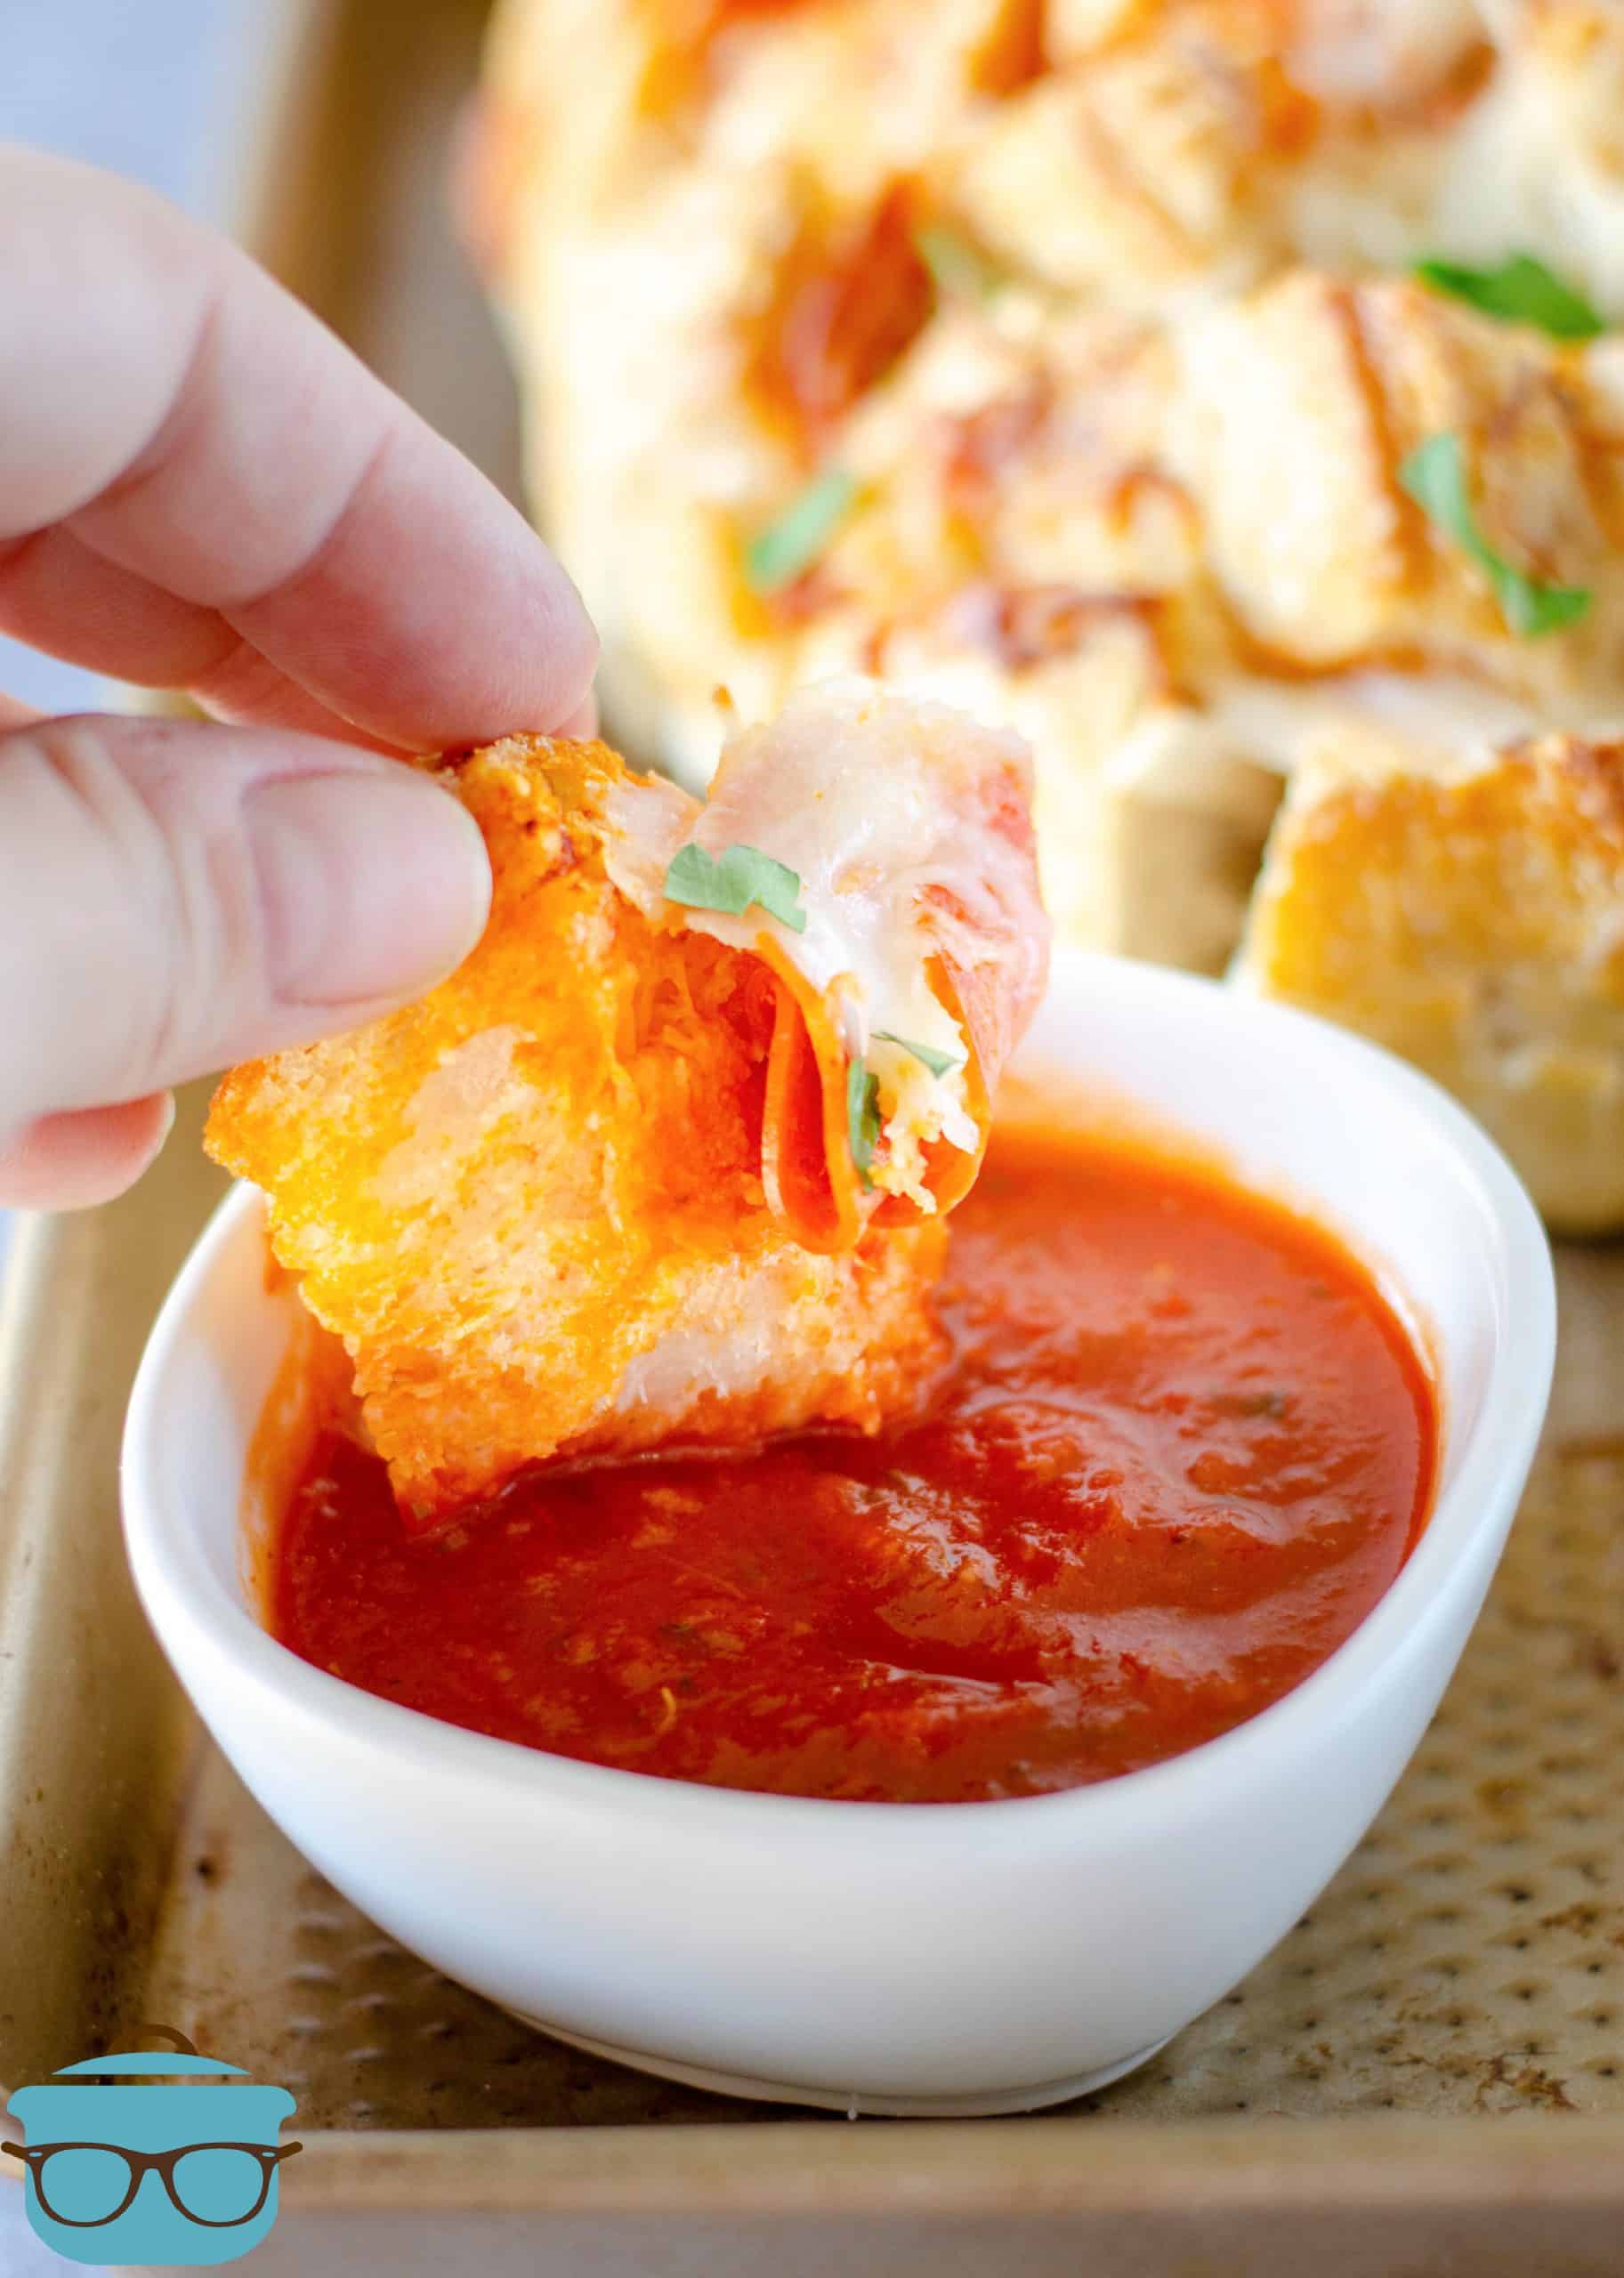 a slice of pepperoni bread being dipped in pizza sauce that is in a small white bowl.